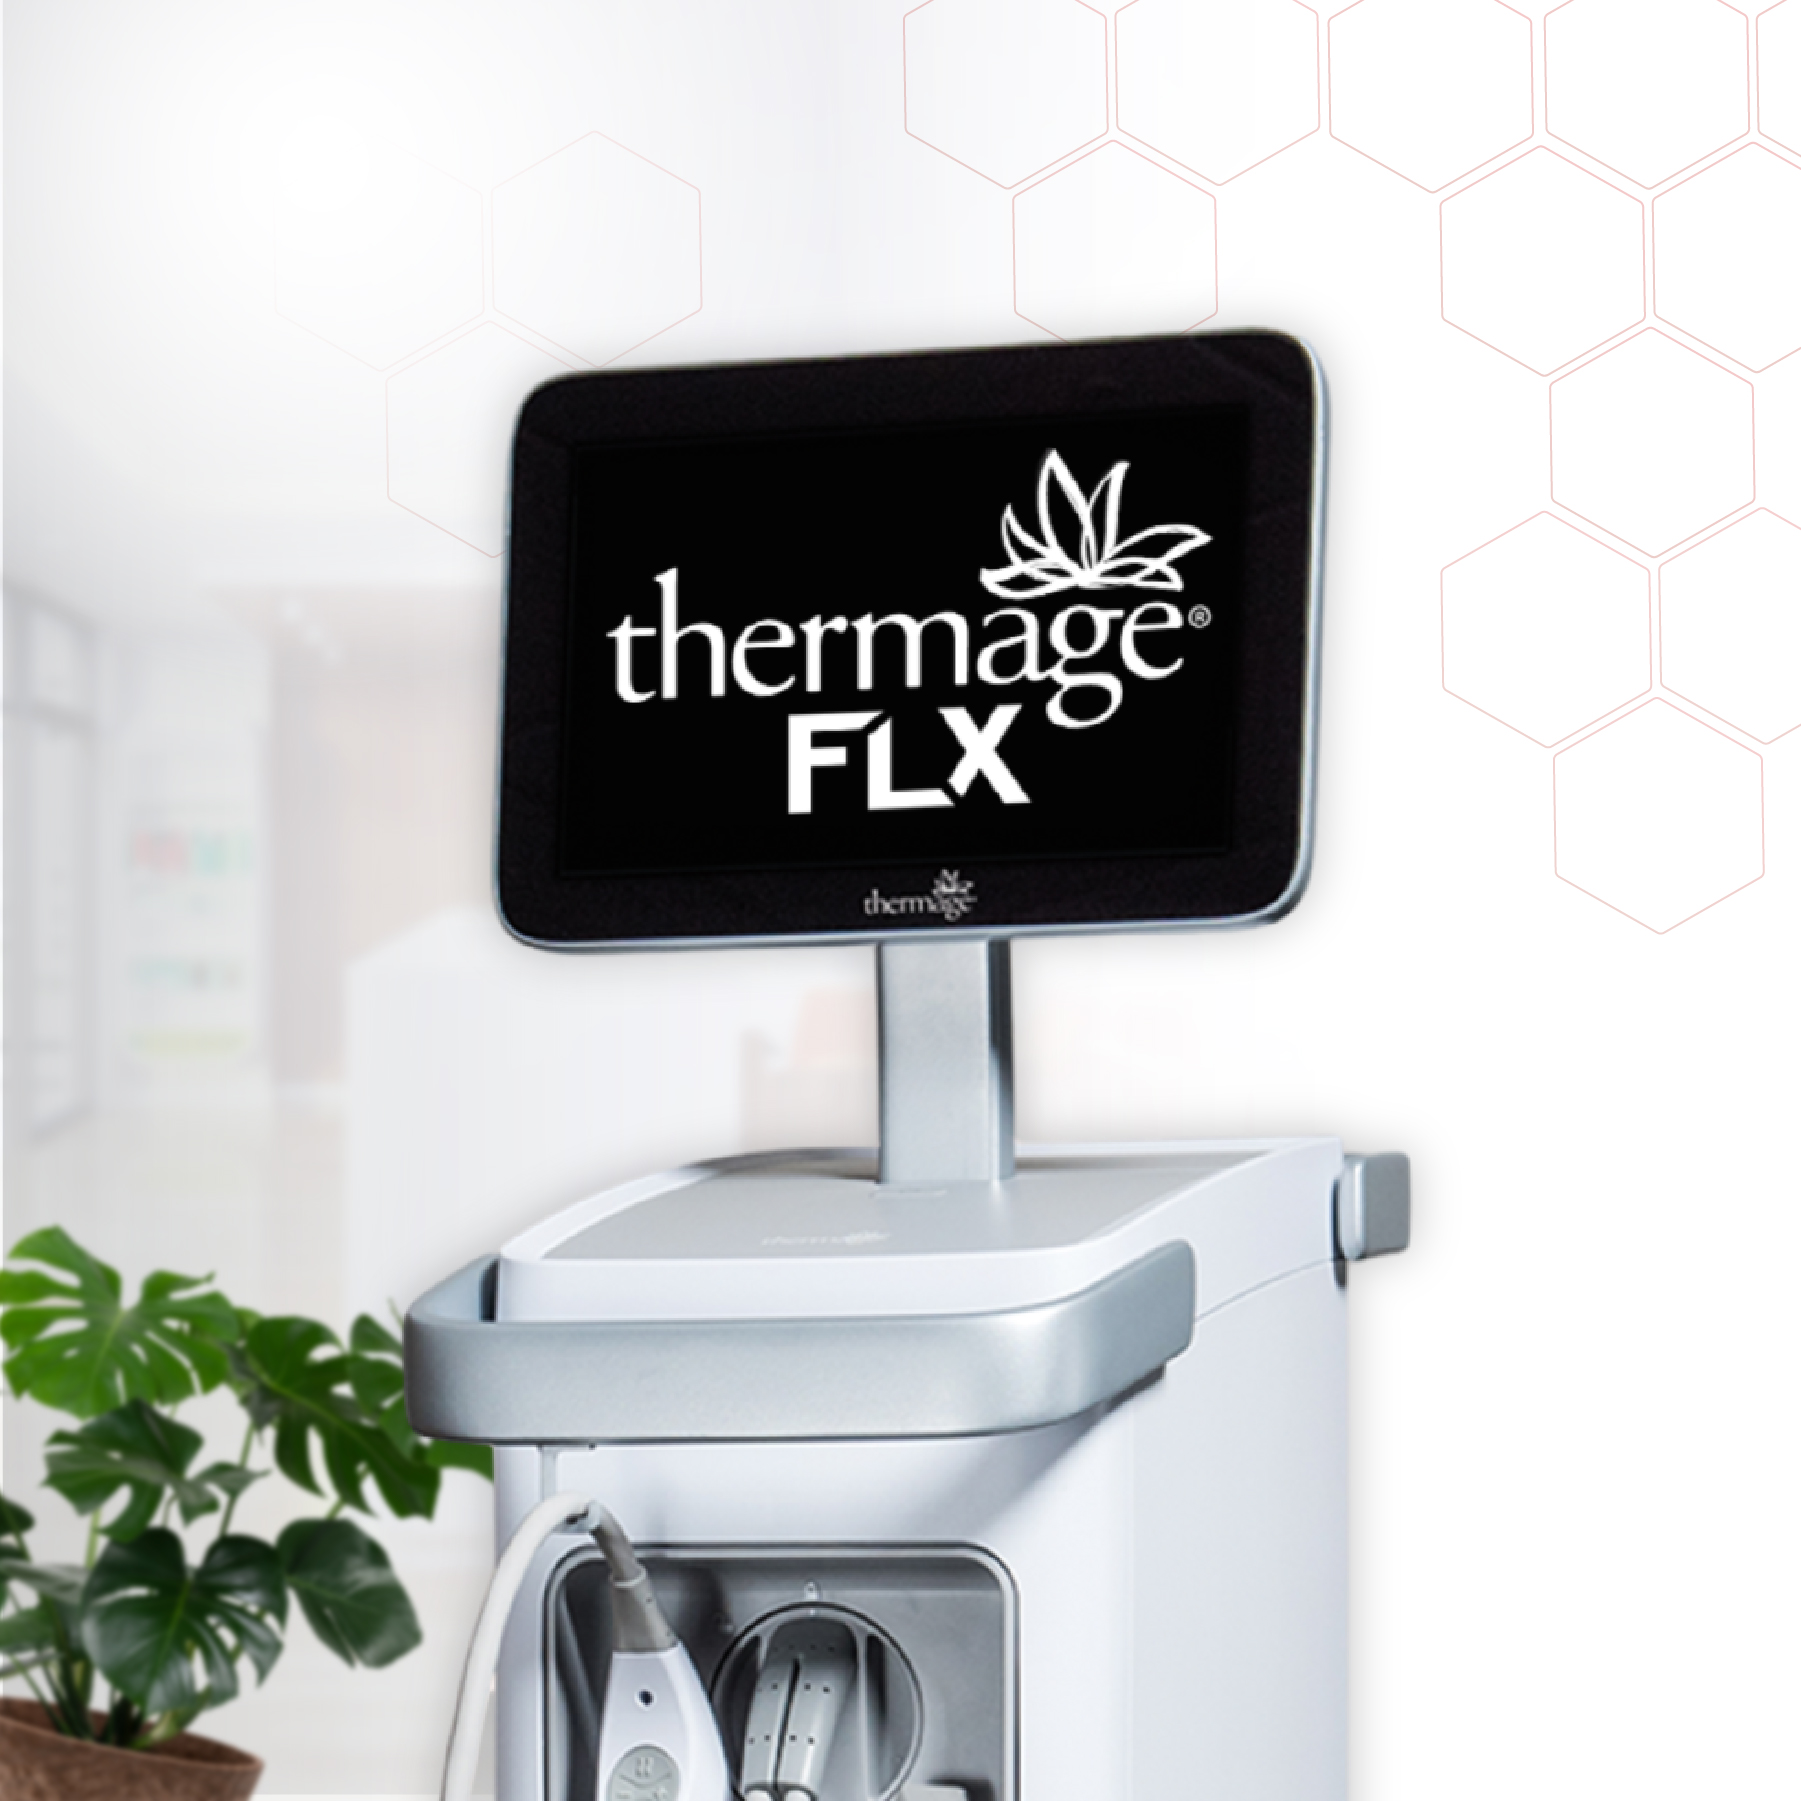 THERMAGE FLX